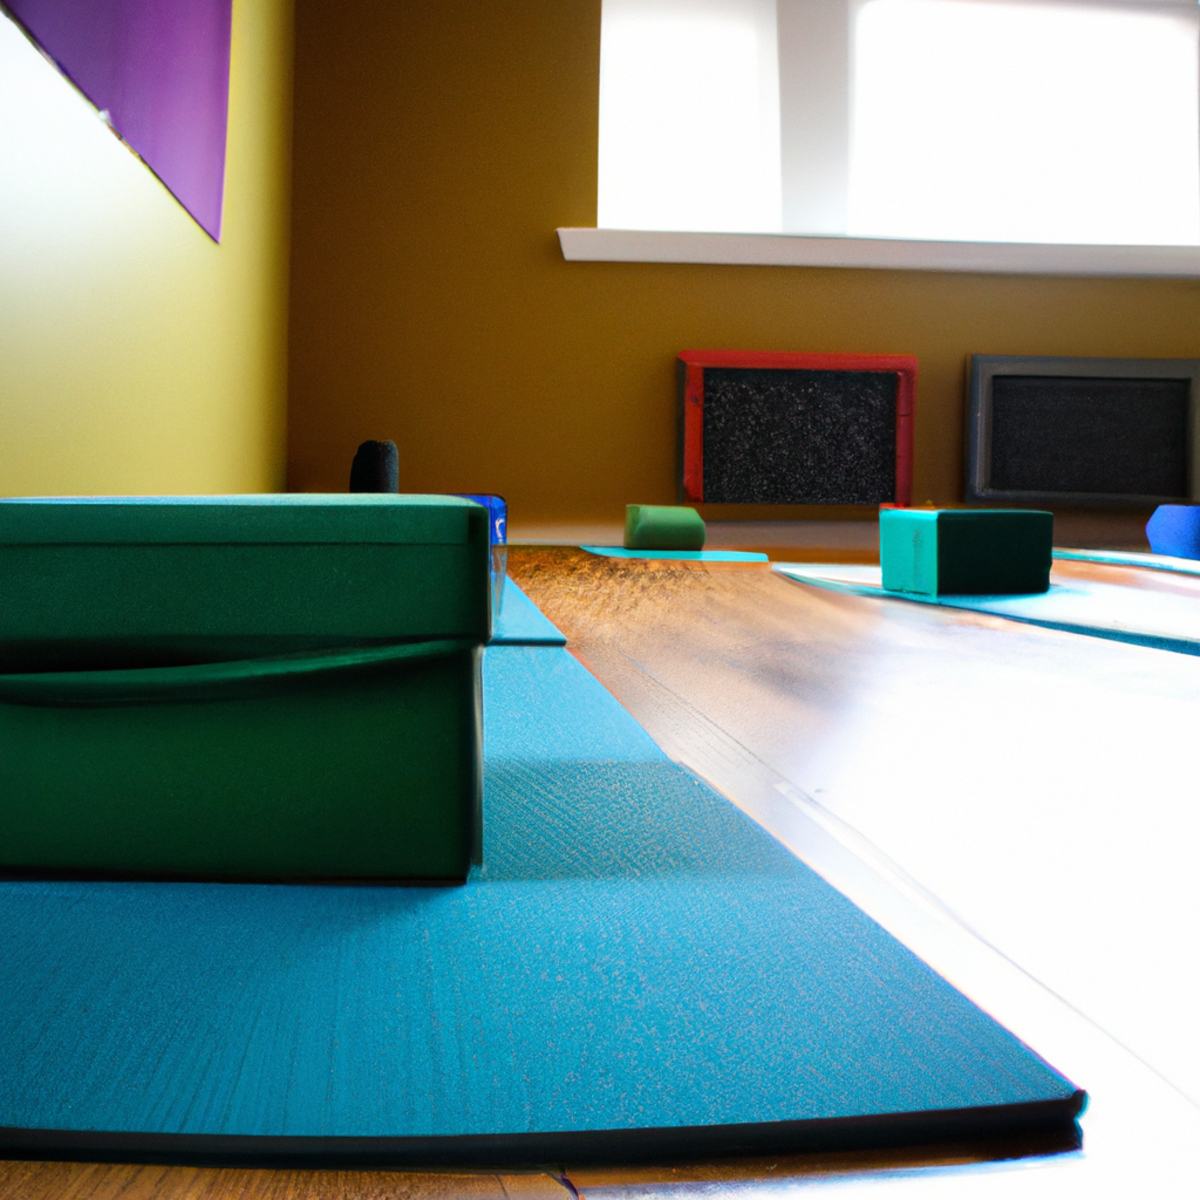 A serene room with yoga mat, essential oils, running shoes, water bottle, and towel promotes stress-relieving exercise -Healthy ways to manage stress